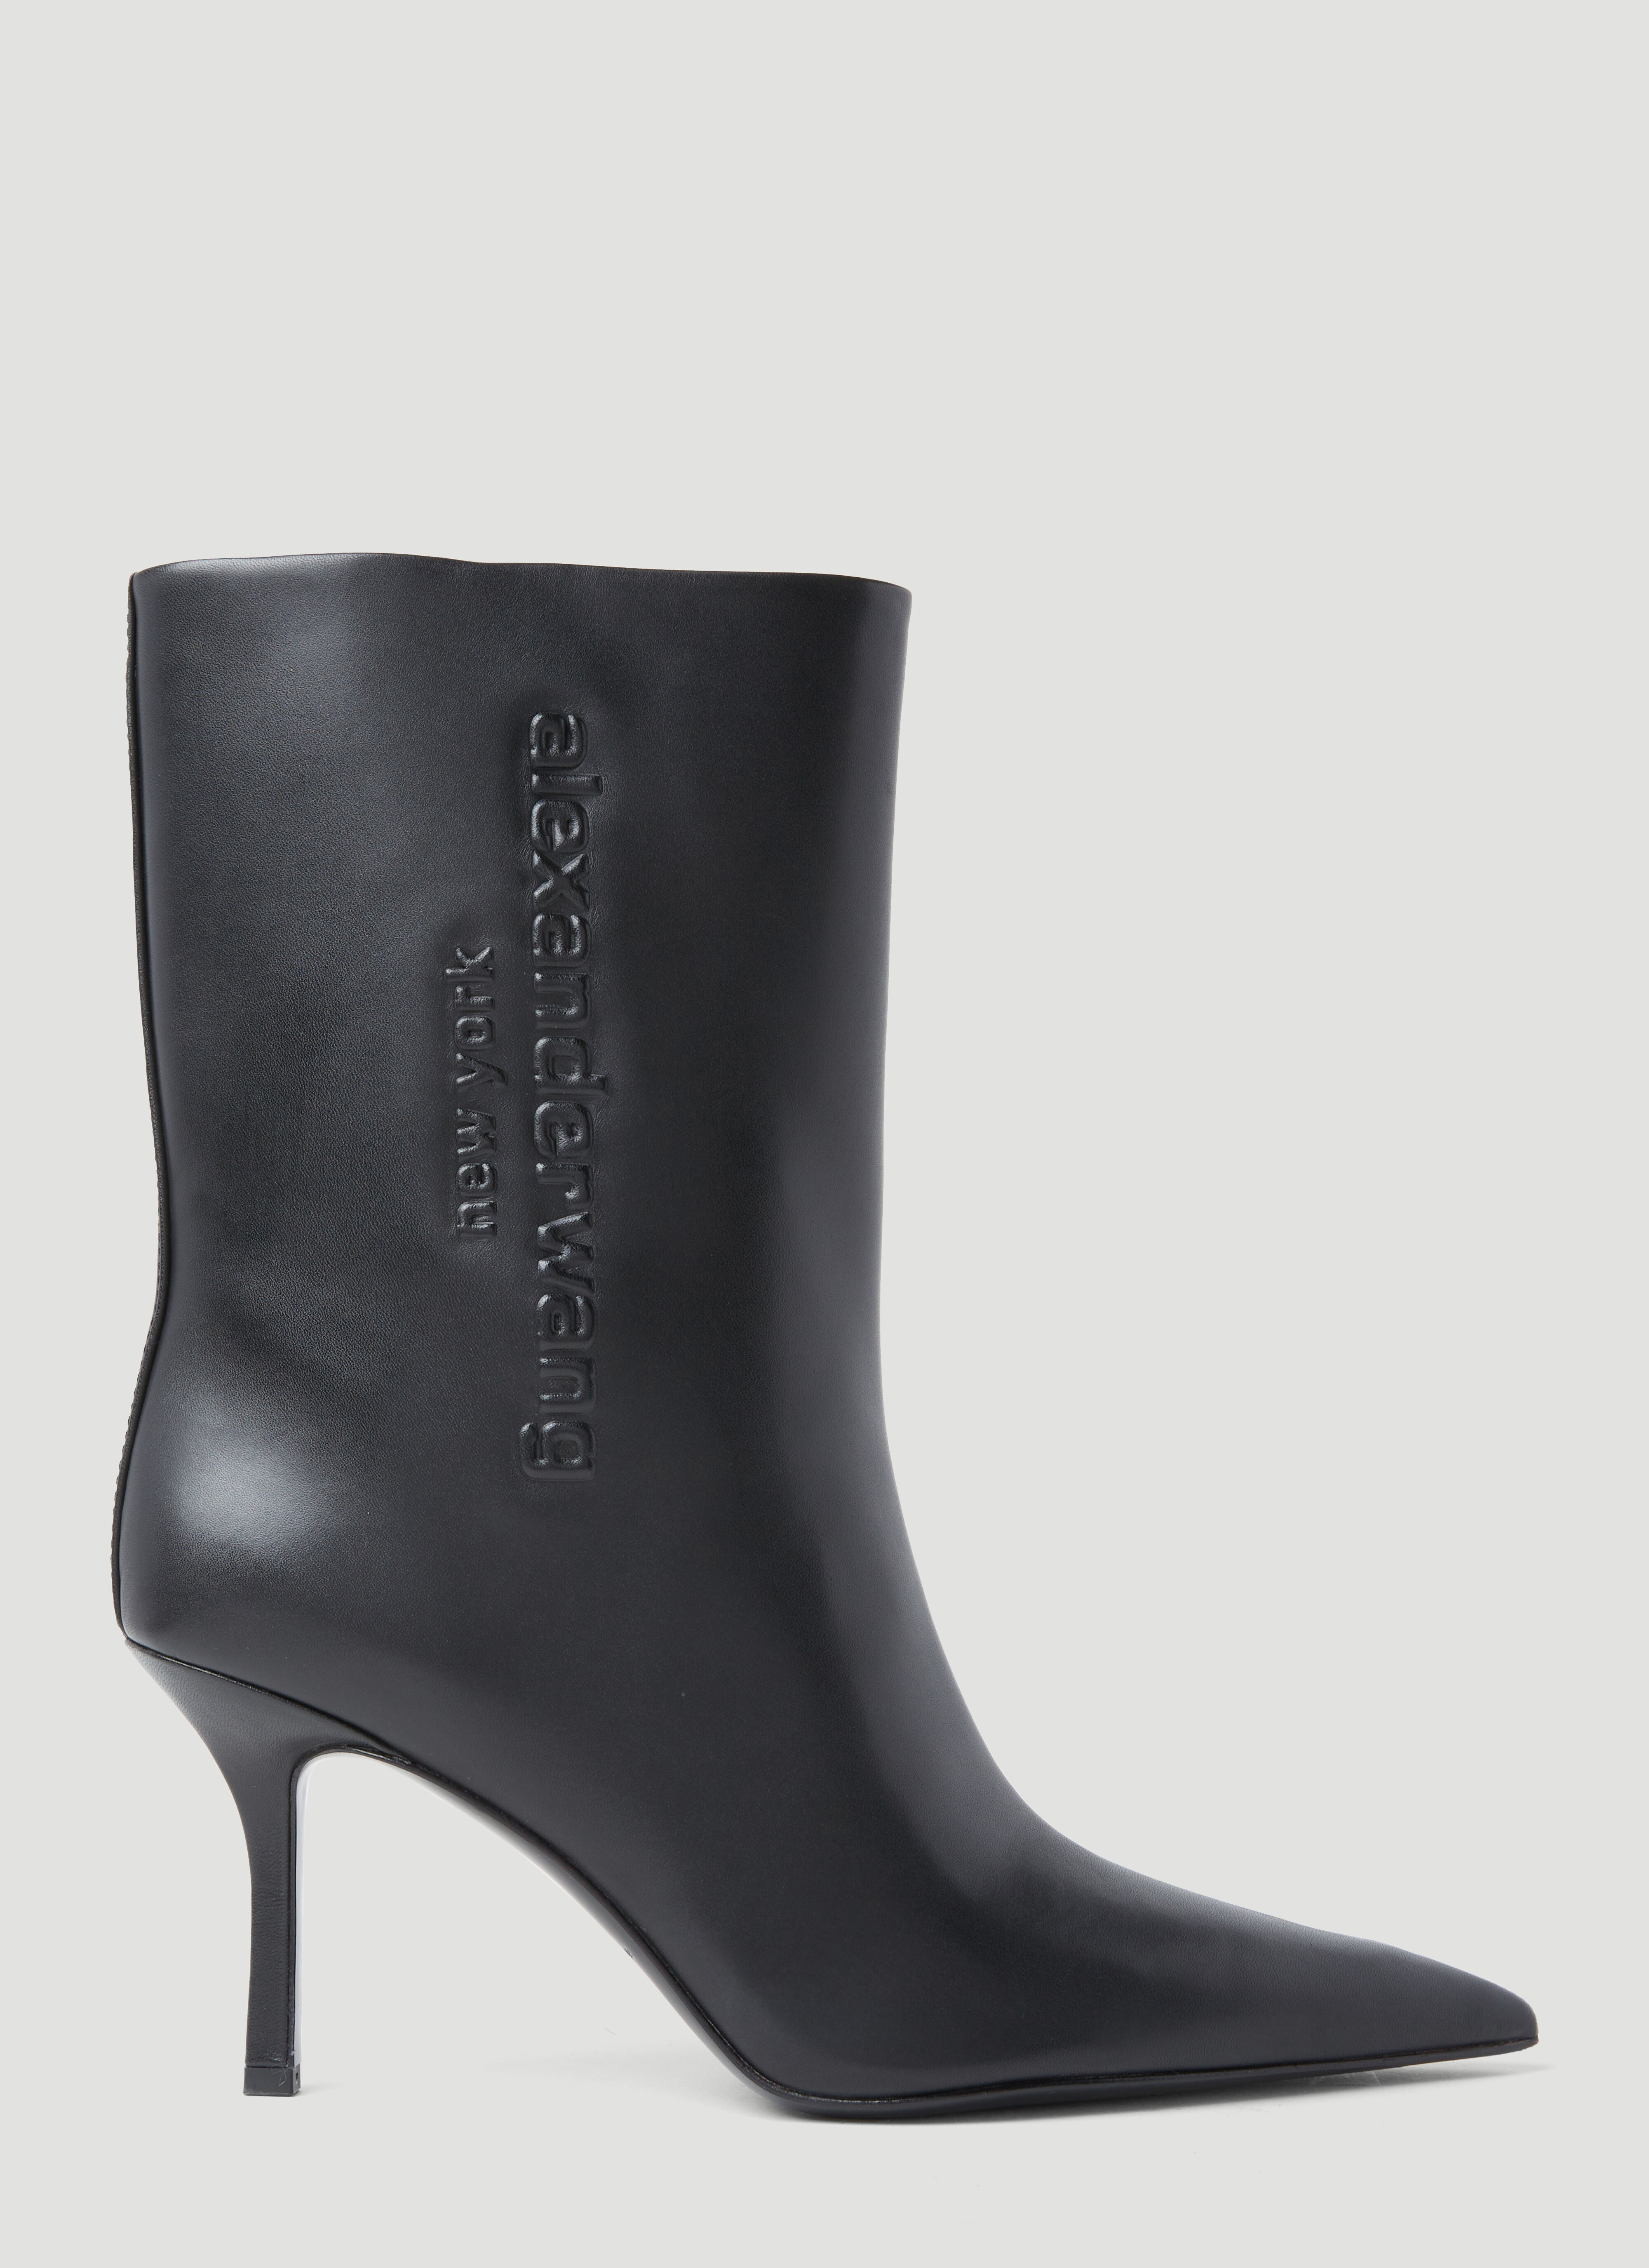 Alexander Wang Delphine Leather Ankle Boots Black awg0249016